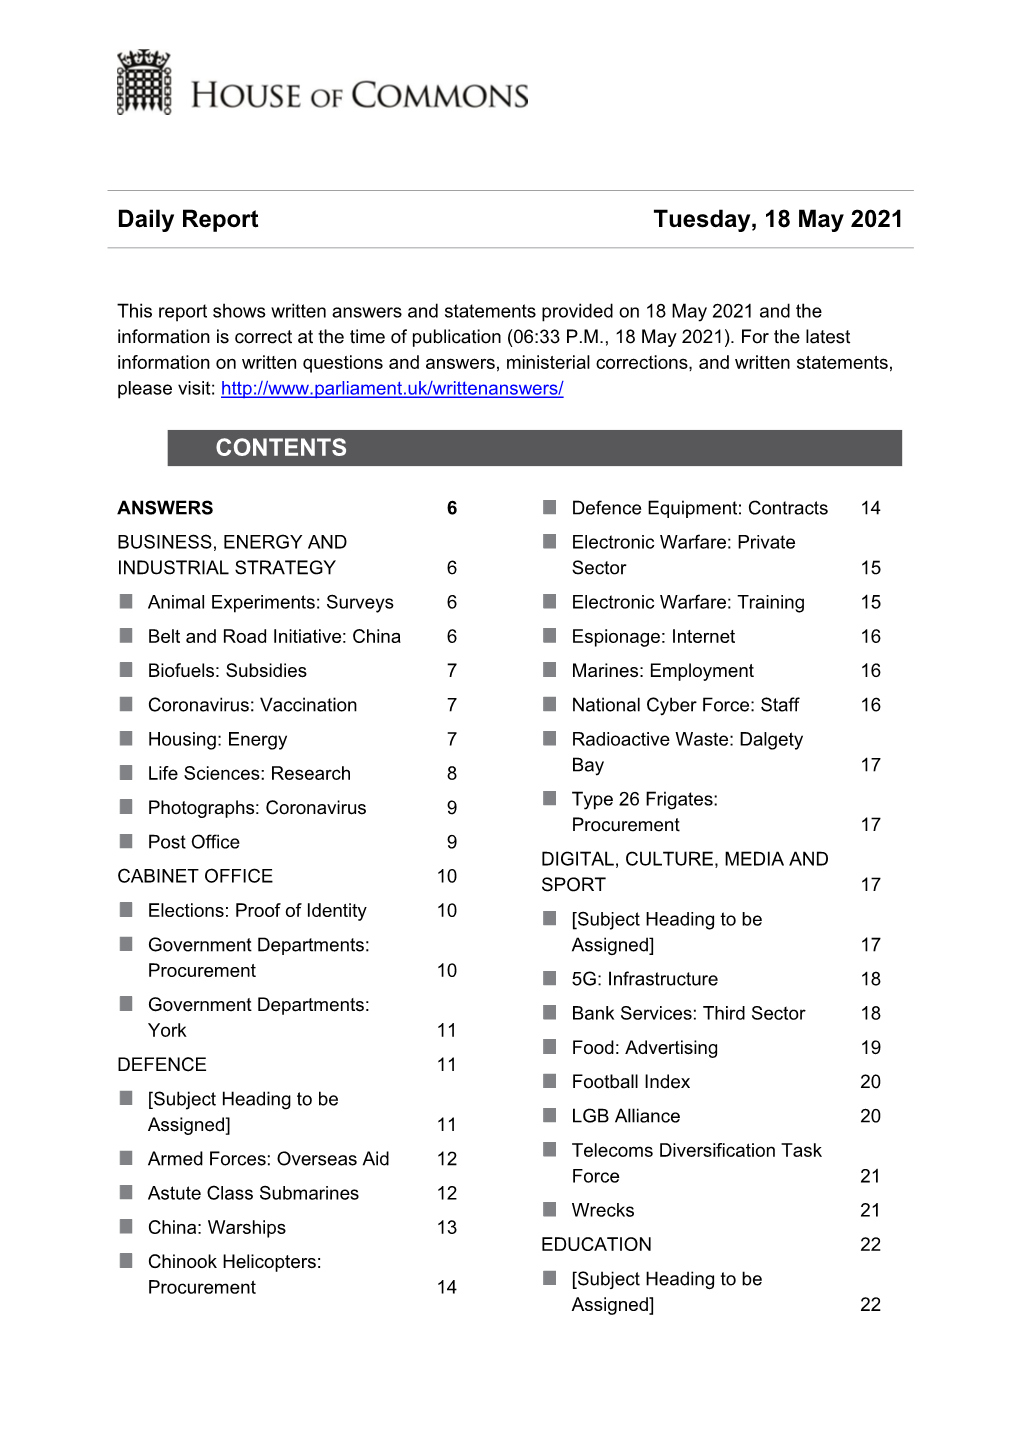 Daily Report Tuesday, 18 May 2021 CONTENTS